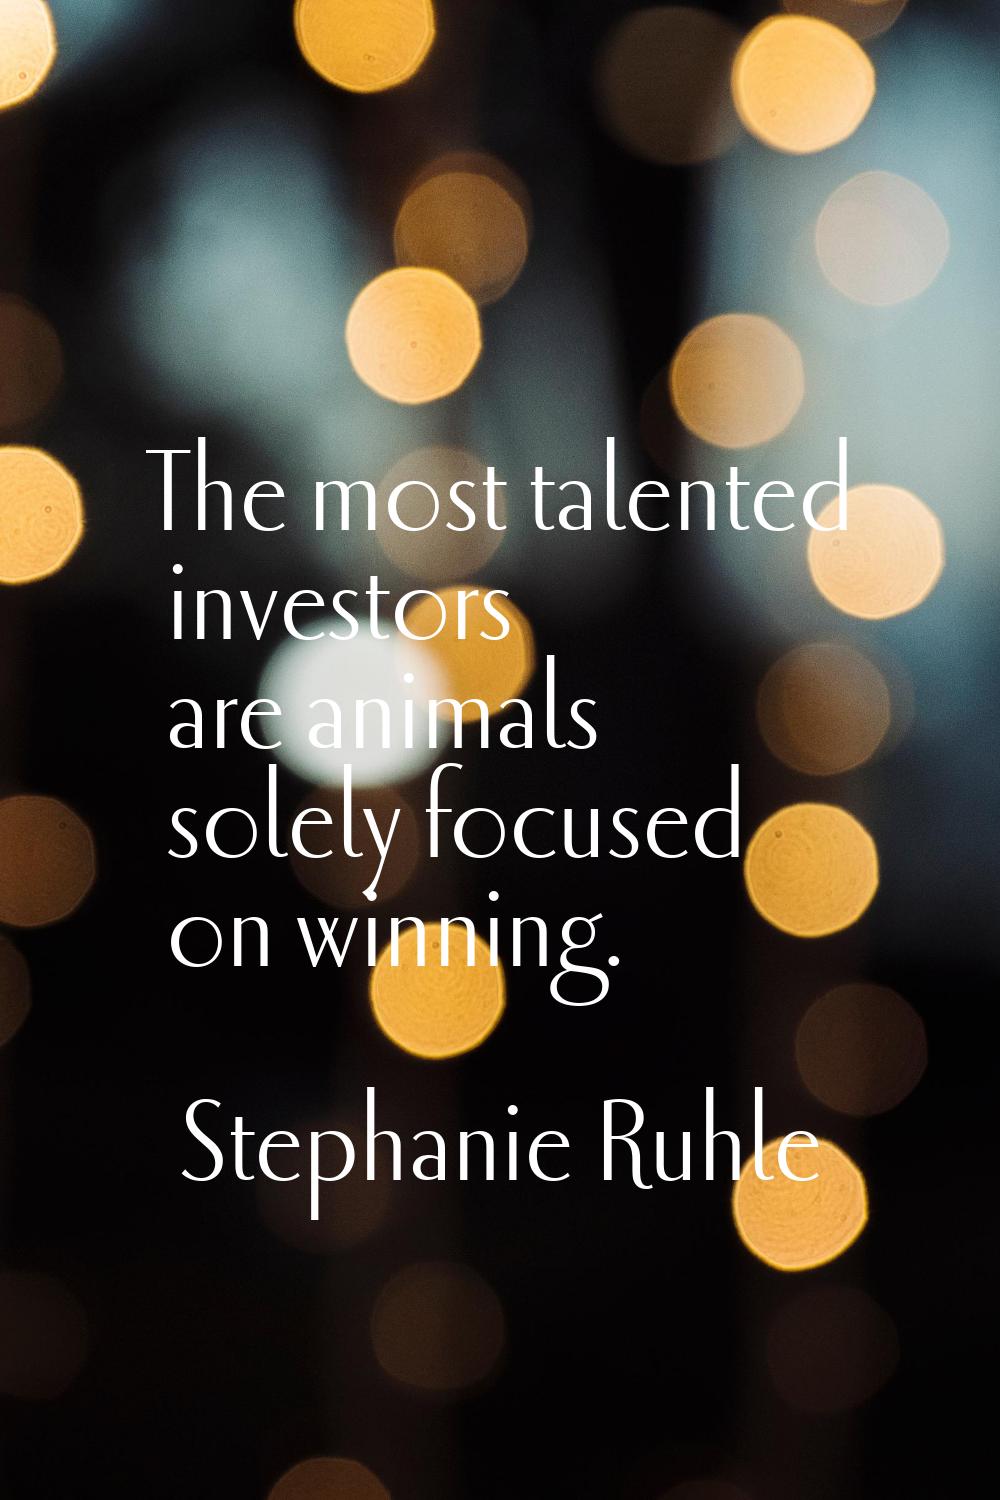 The most talented investors are animals solely focused on winning.